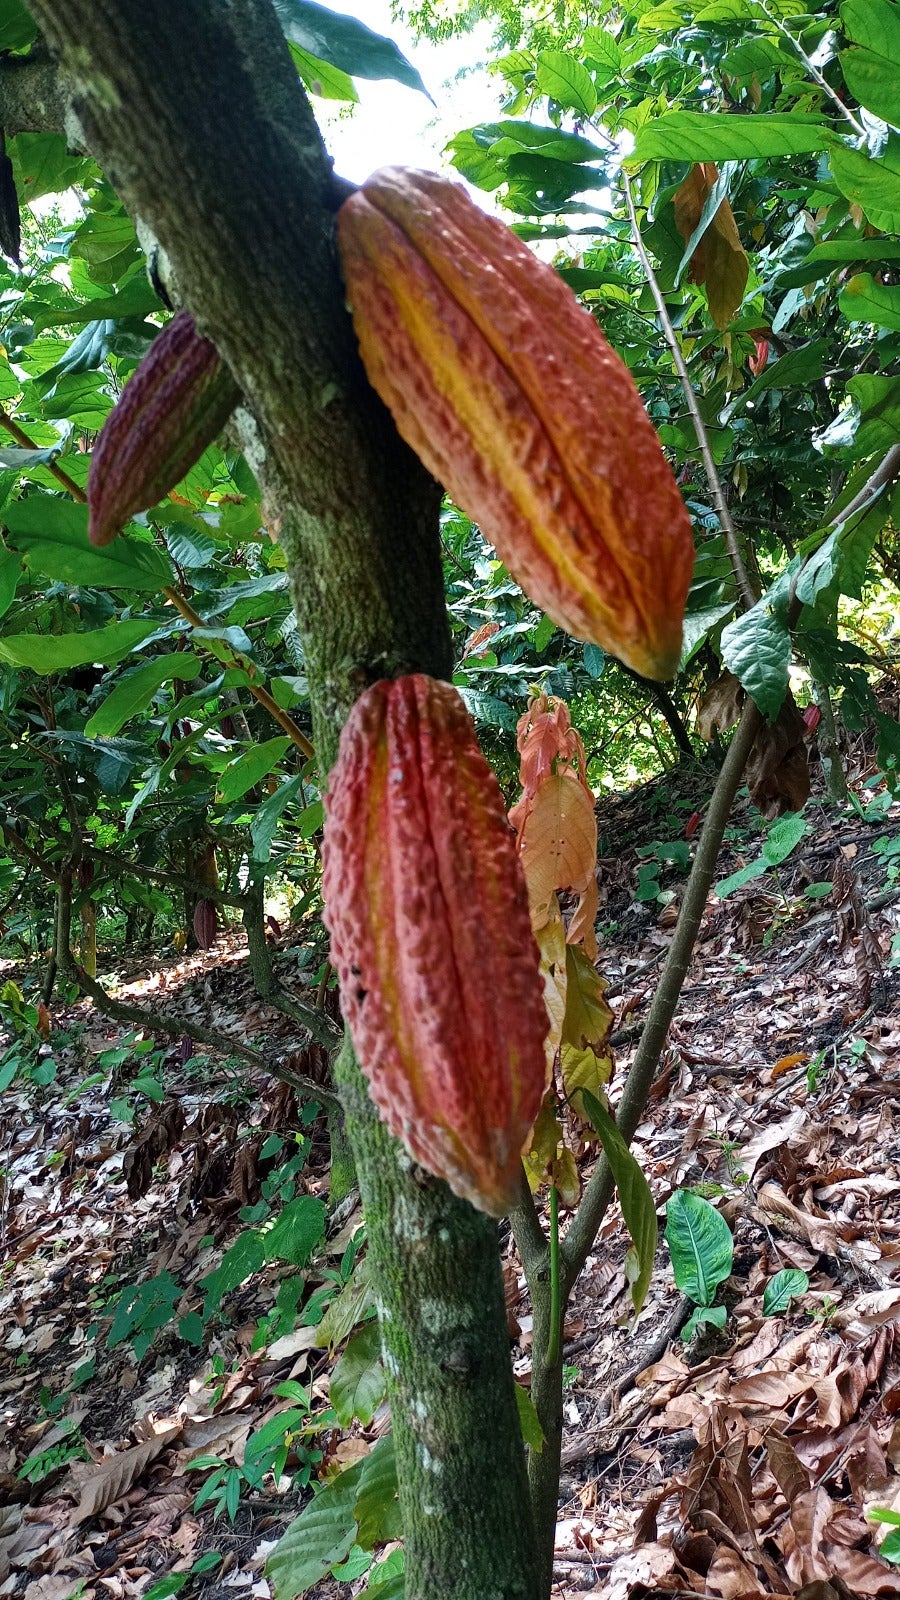 Cocoa fruits on Diego and Marcela's farm. Photo by Diego Marín.